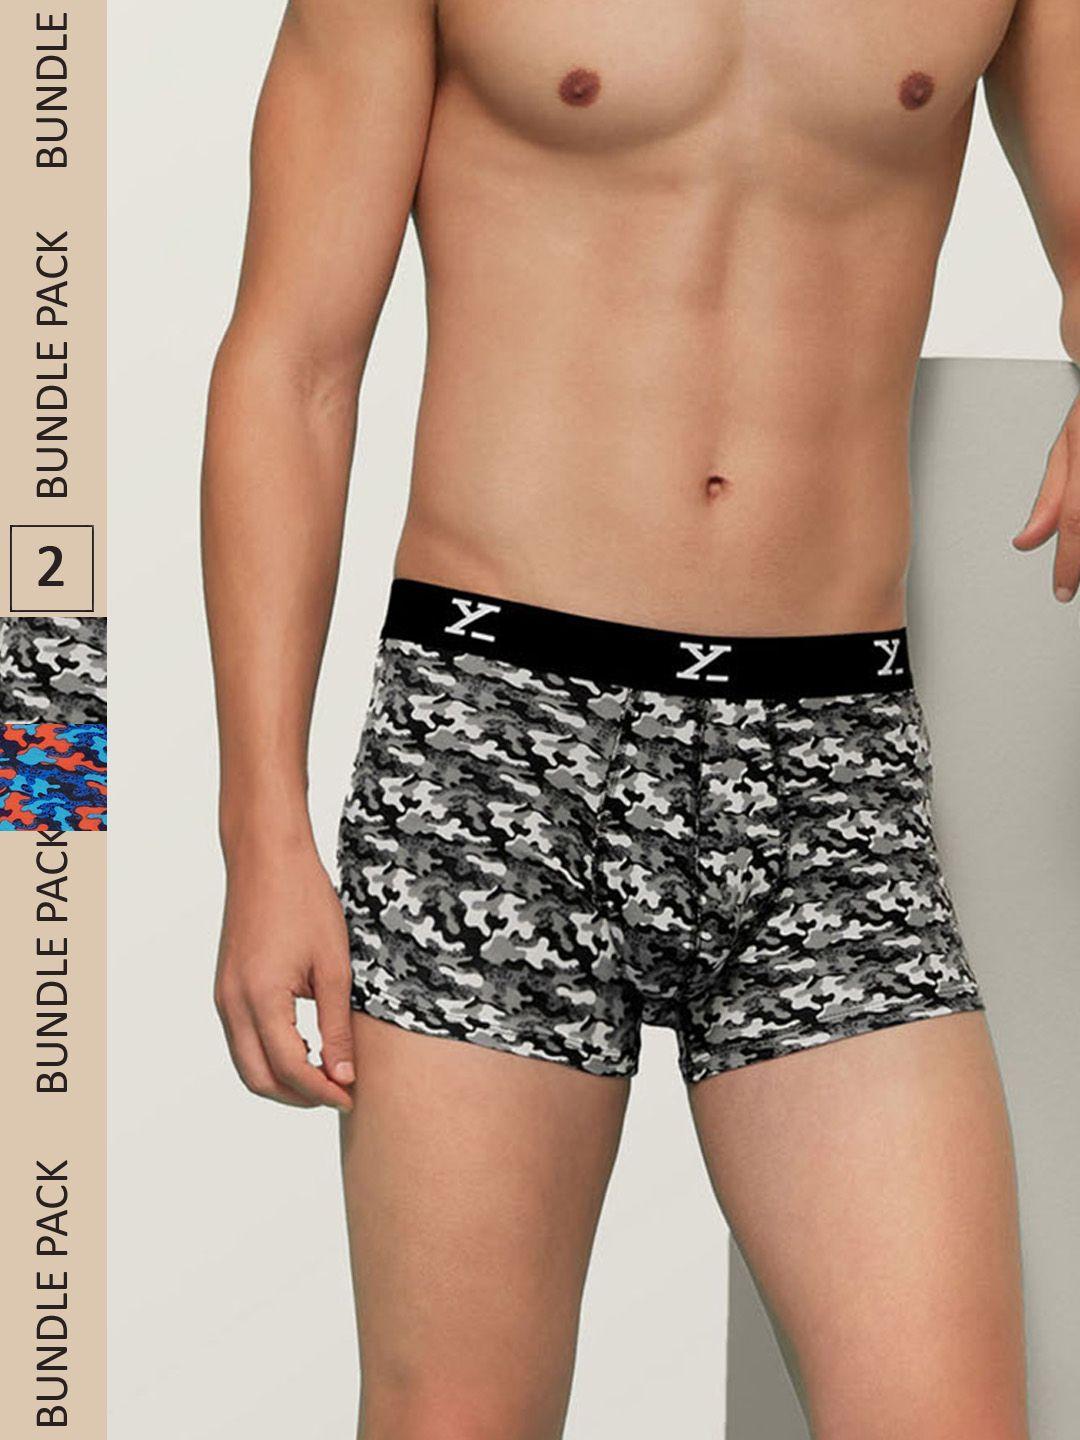 xyxx men intellisoft antimicrobial micro modal pack of 2 shuffle trunks xytrnk2pckn213